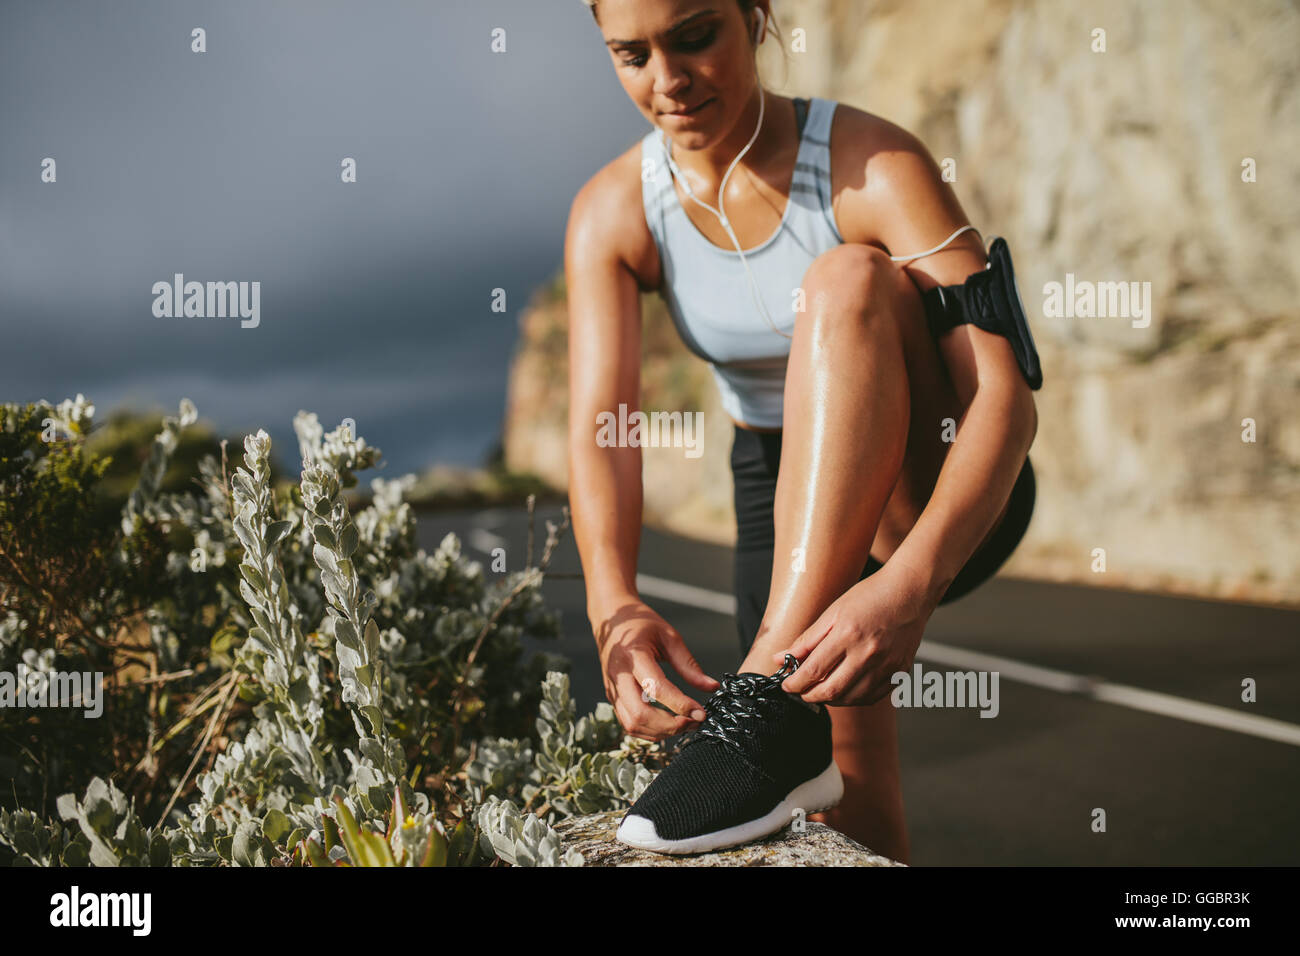 Woman lacing running shoes outdoors on countryside road. Fitness and healthy lifestyle concept. Stock Photo